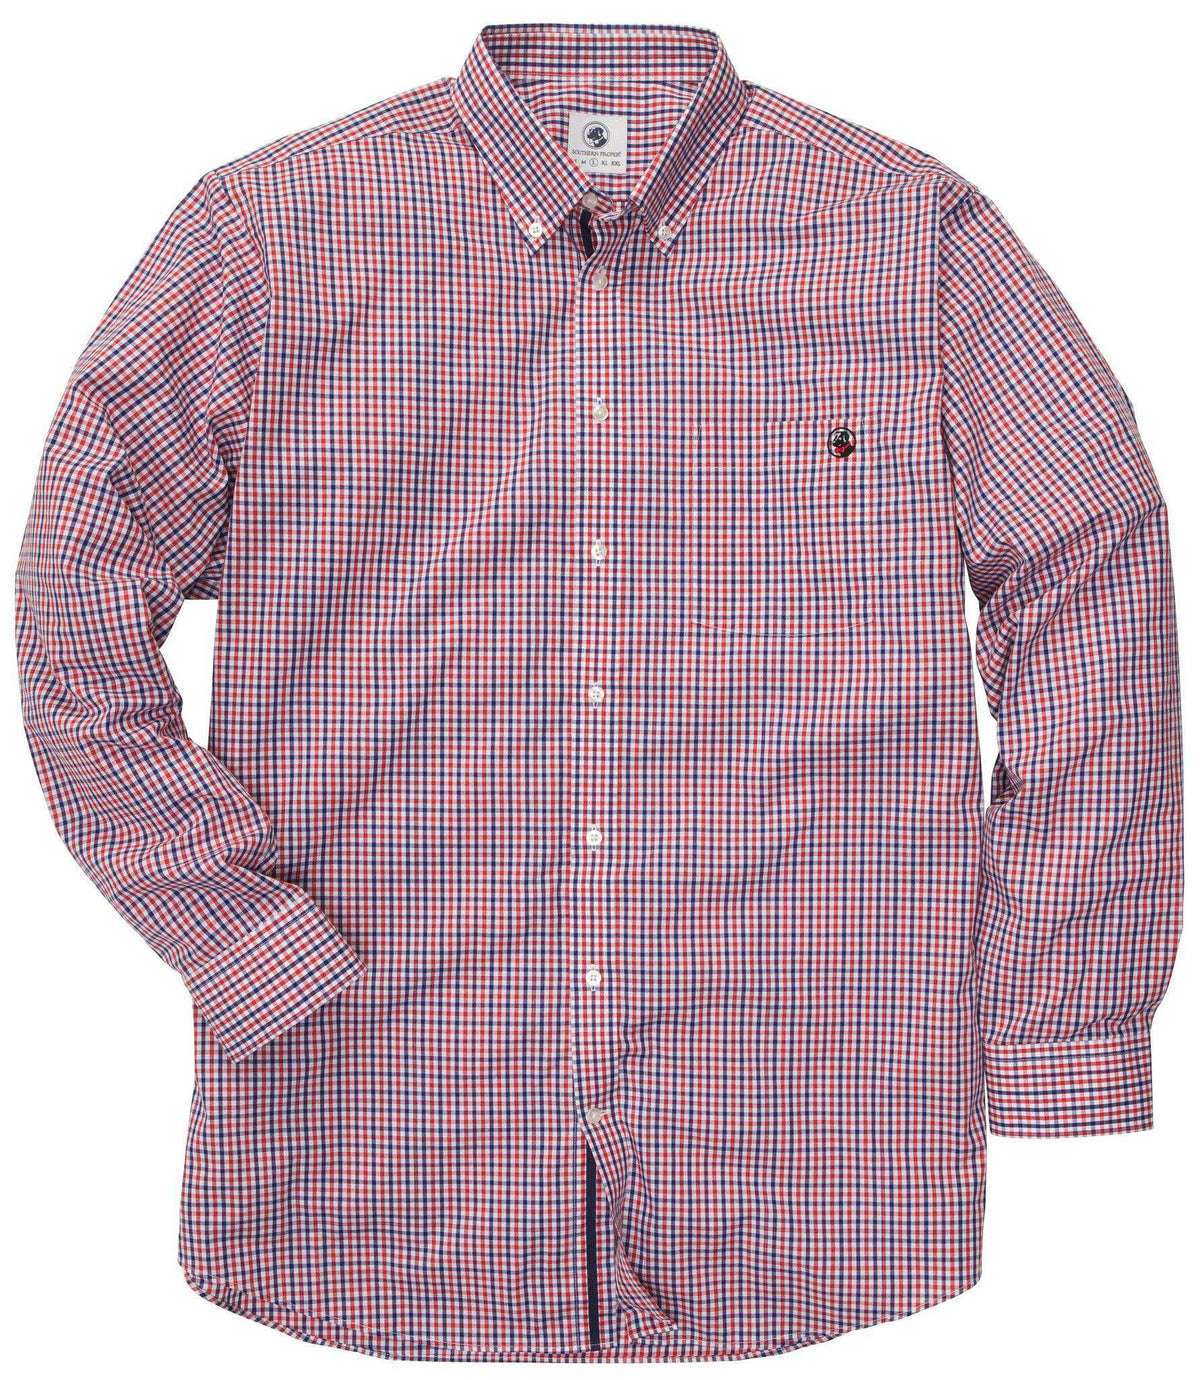 Goal Line Shirt in Navy & Red Check by Southern Proper - Country Club Prep